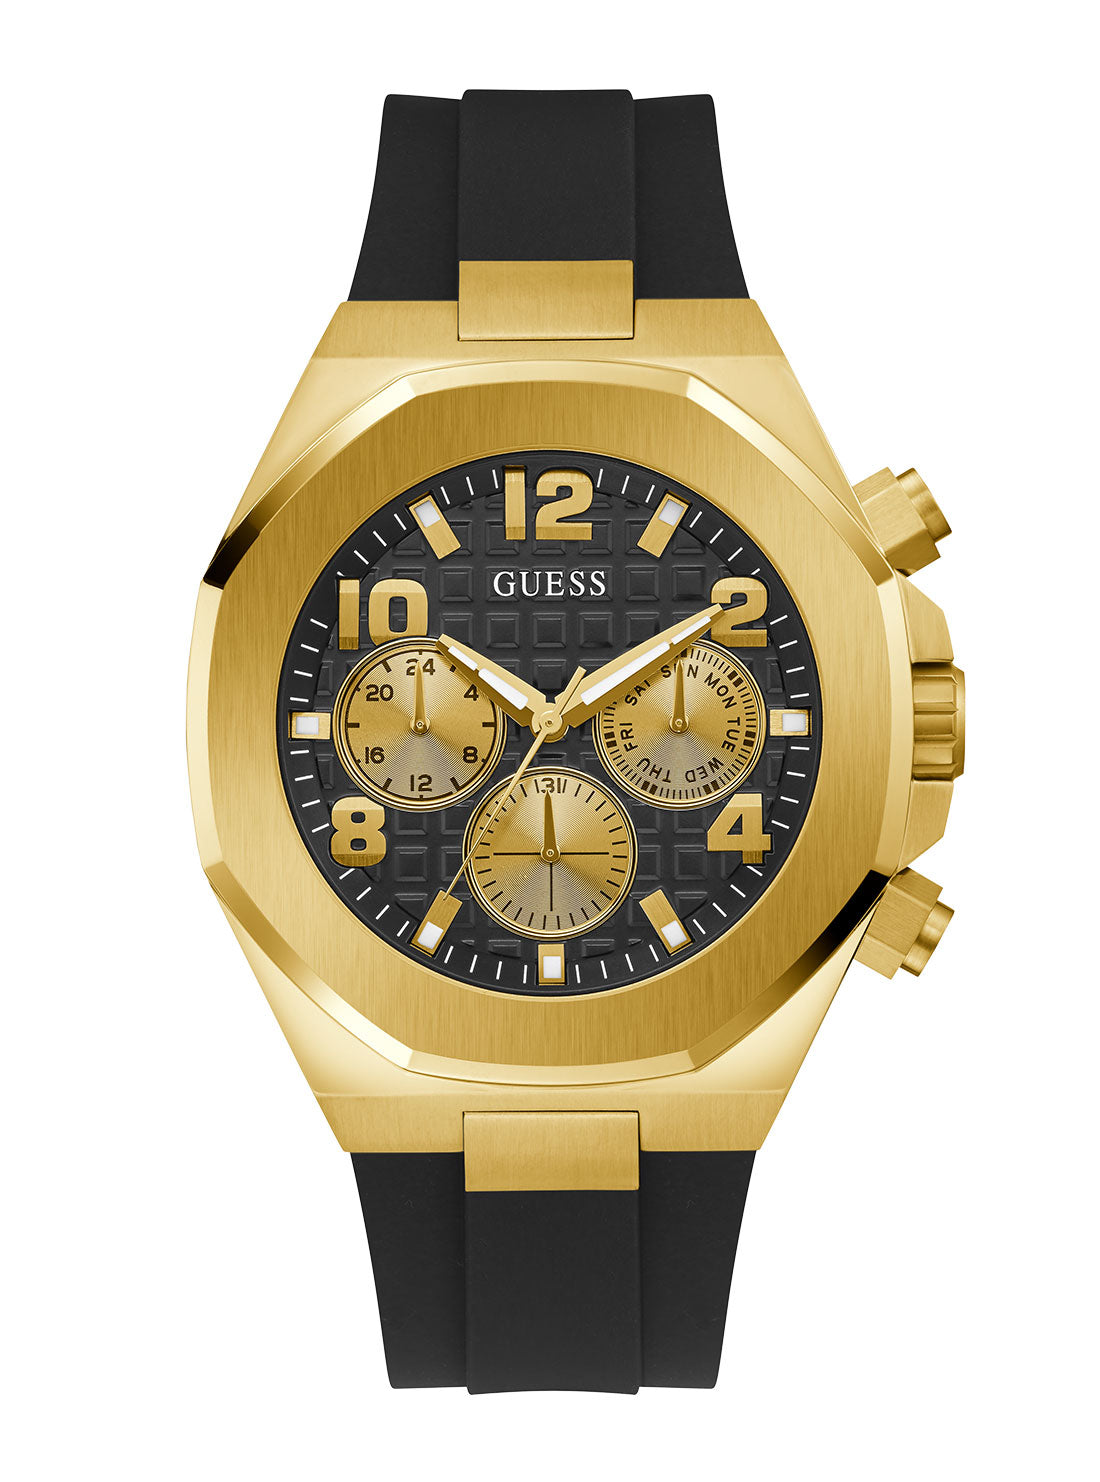 GUESS Men's Gold Empire Silicone Watch GW0583G2 Front View